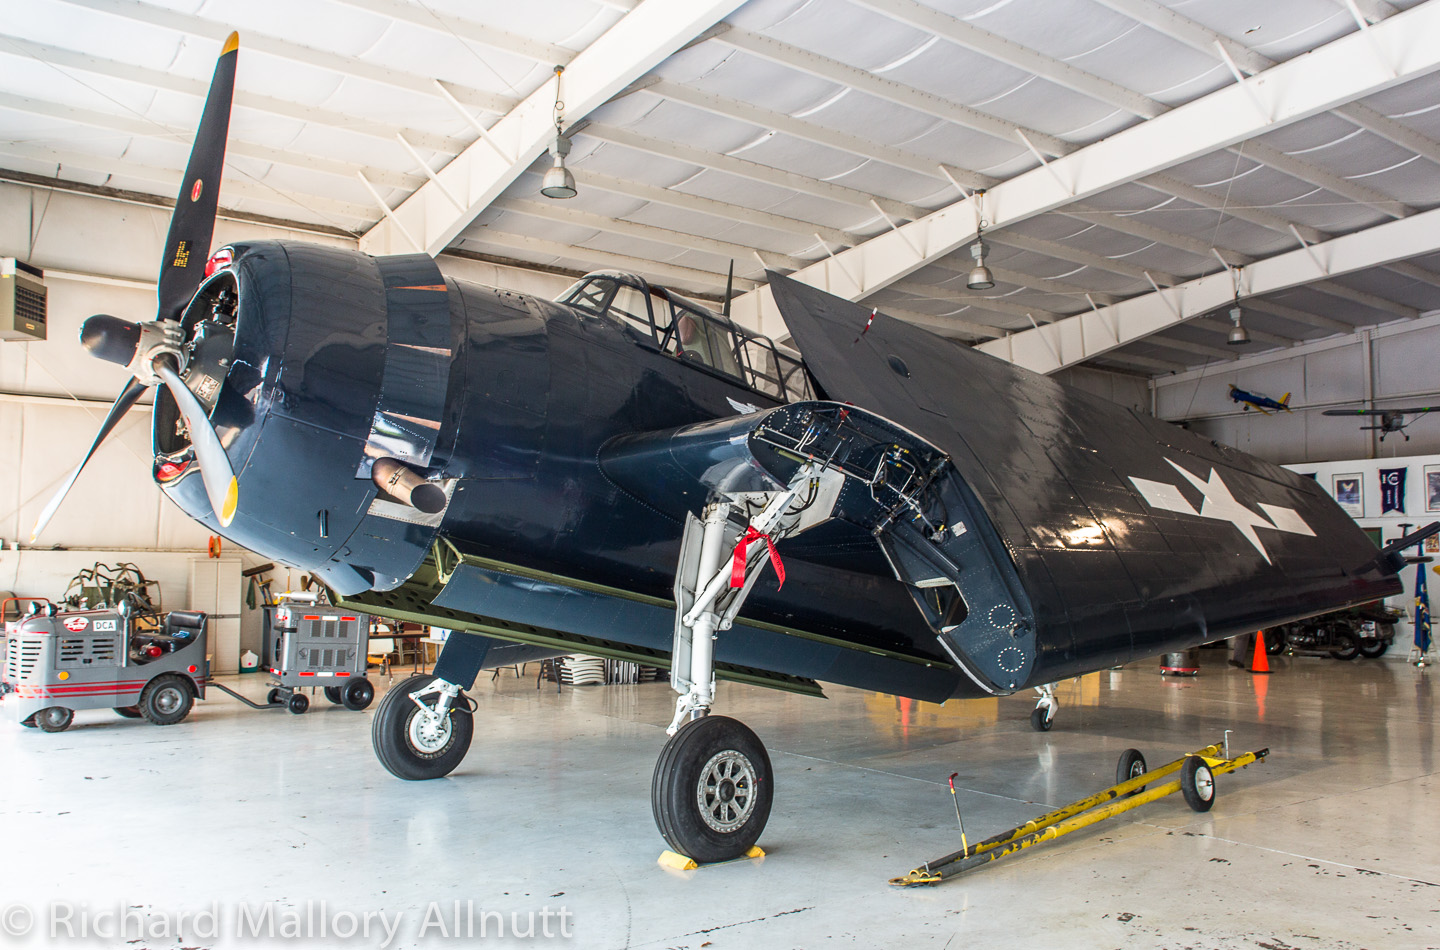 The CAF's freshly refurbished TBM-3E Avenger (Bu.91426) is now home in Culpeper. (photo by Richard Mallory Allnutt)